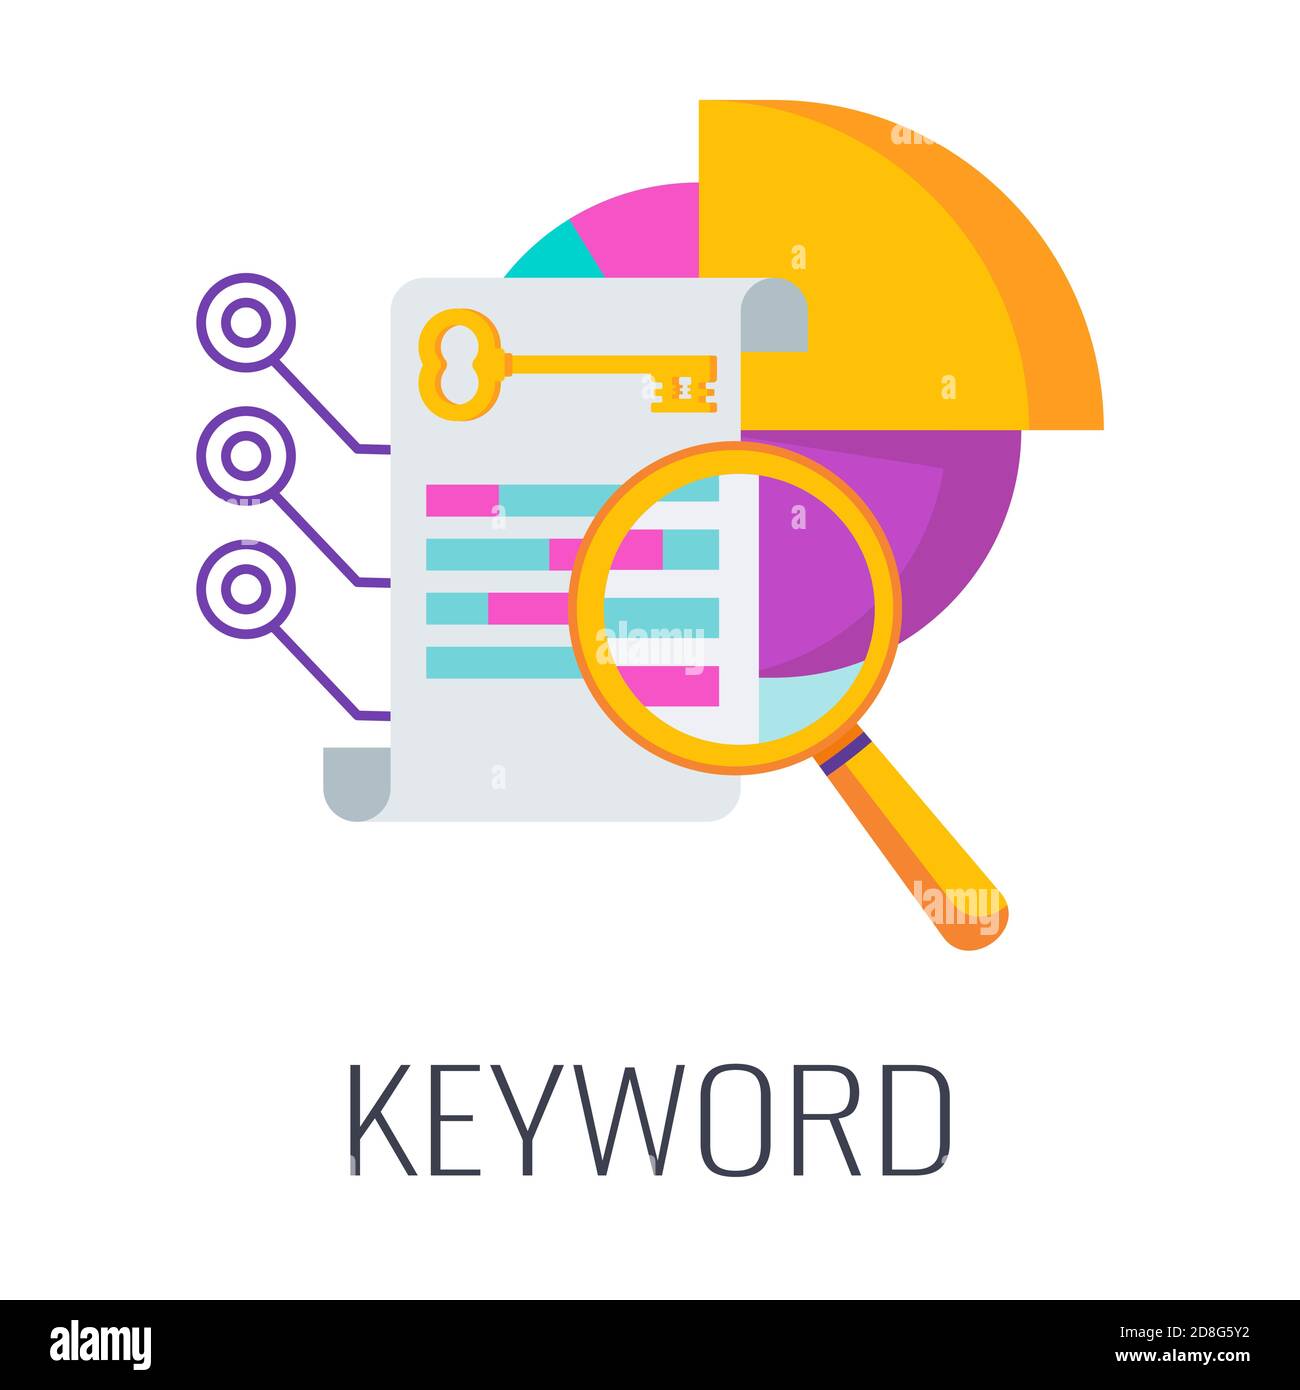 Keyword Icon Key Magnifier With Document Pie Chart Stock Vector Image Art Alamy